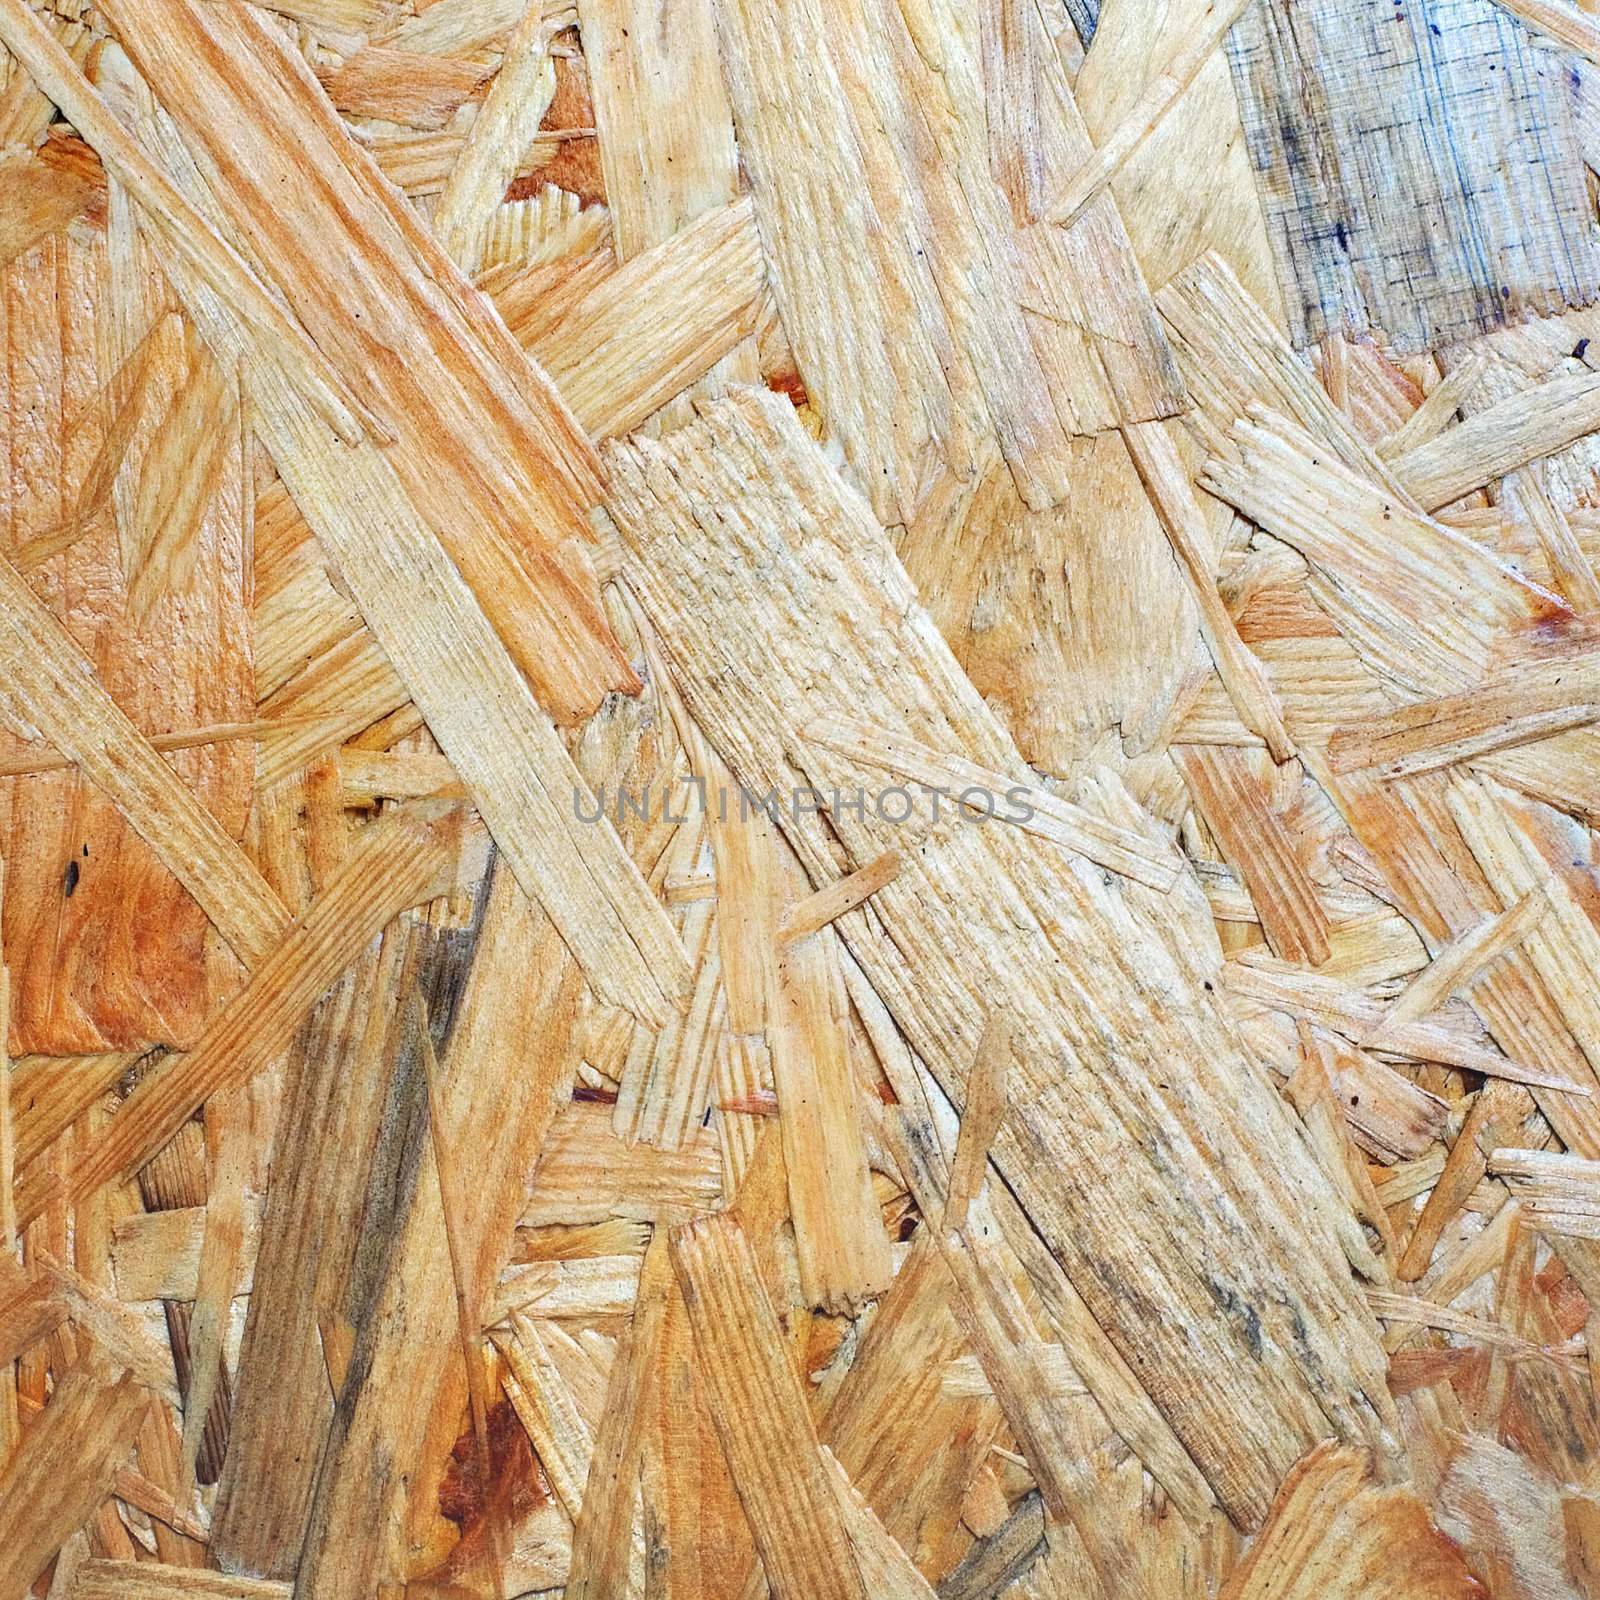 The surface of wooden textured board